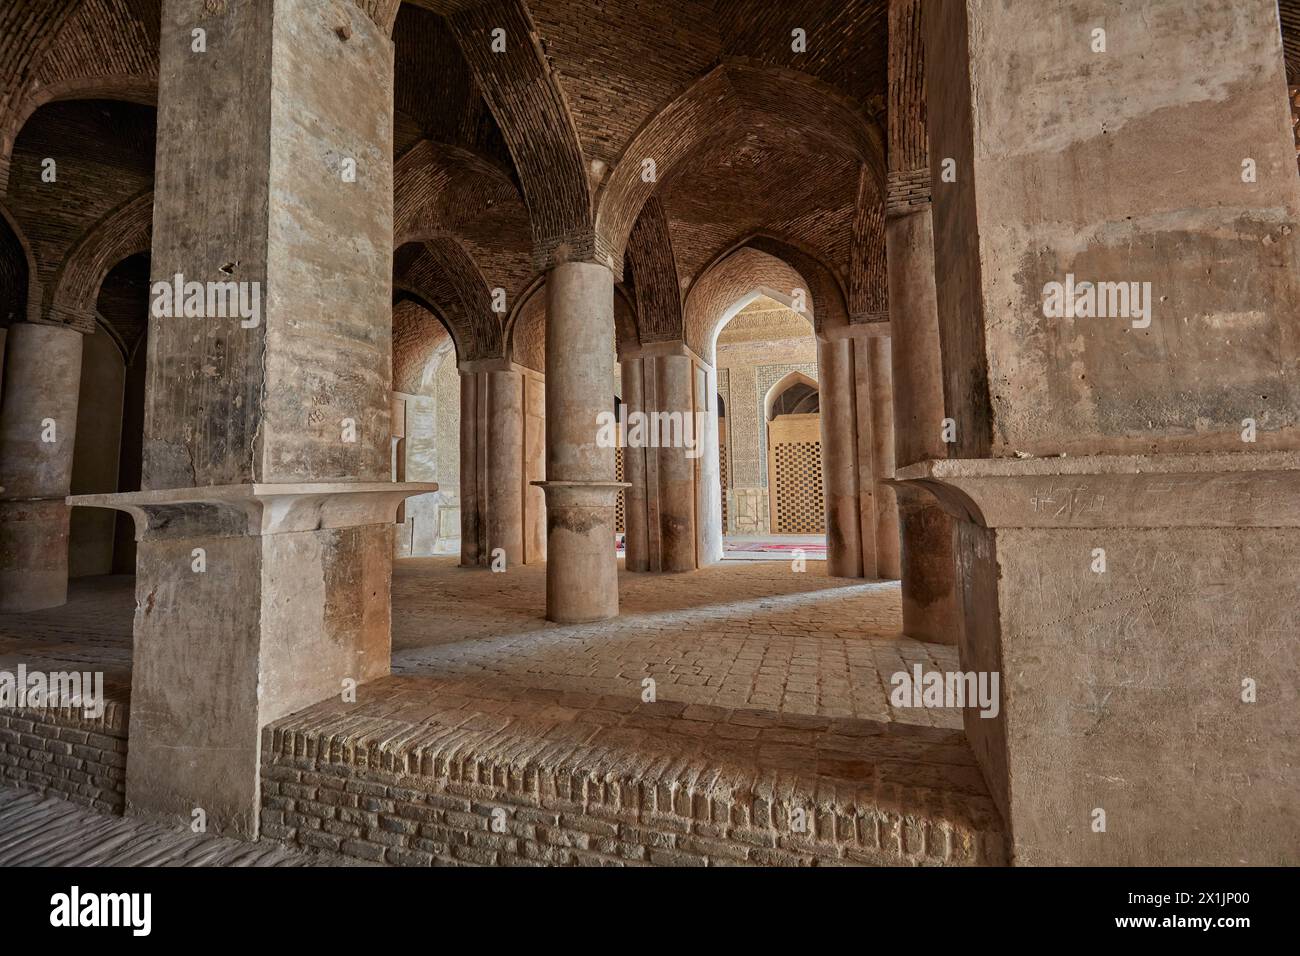 Interior view of hypostyle hall with many pillars supporting roof of brick vaults in the Jameh Mosque of Isfahan, Iran. Stock Photo